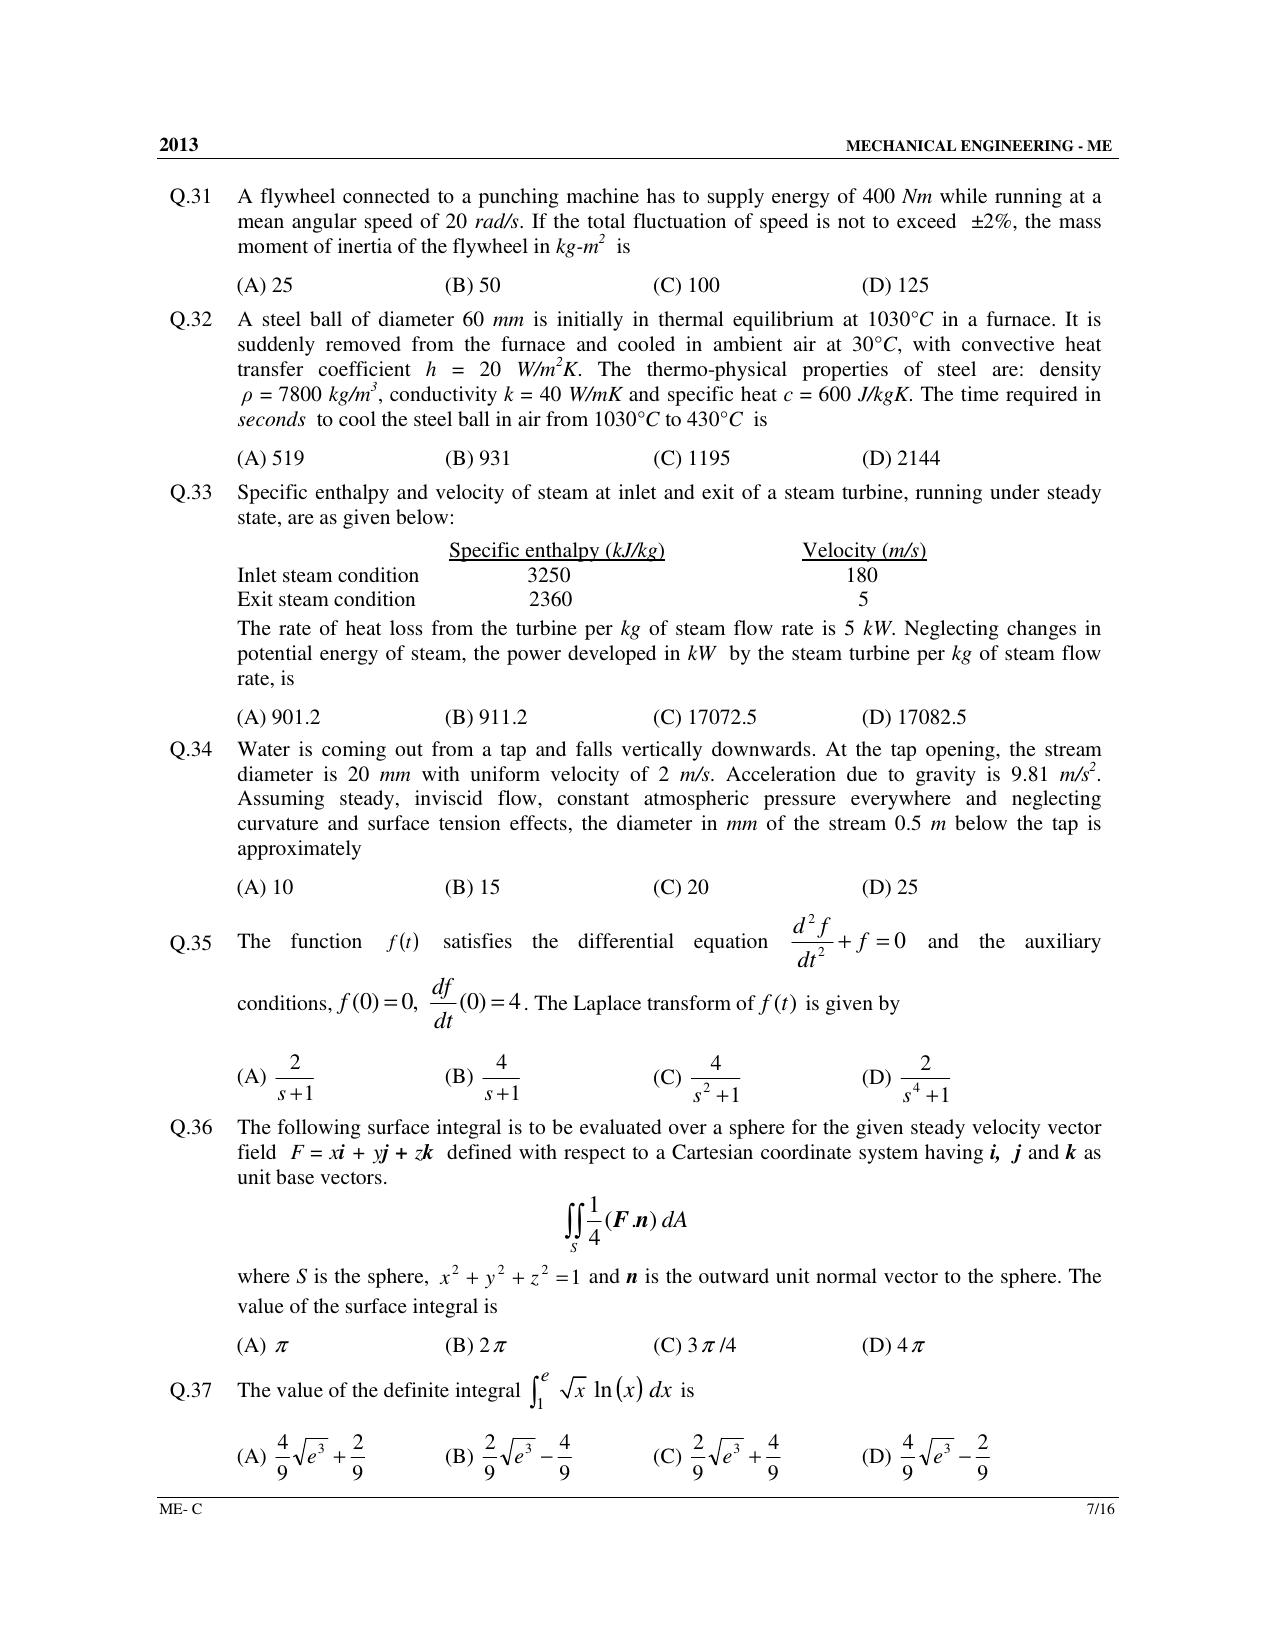 GATE 2013 Mechanical Engineering (ME) Question Paper with Answer Key - Page 36